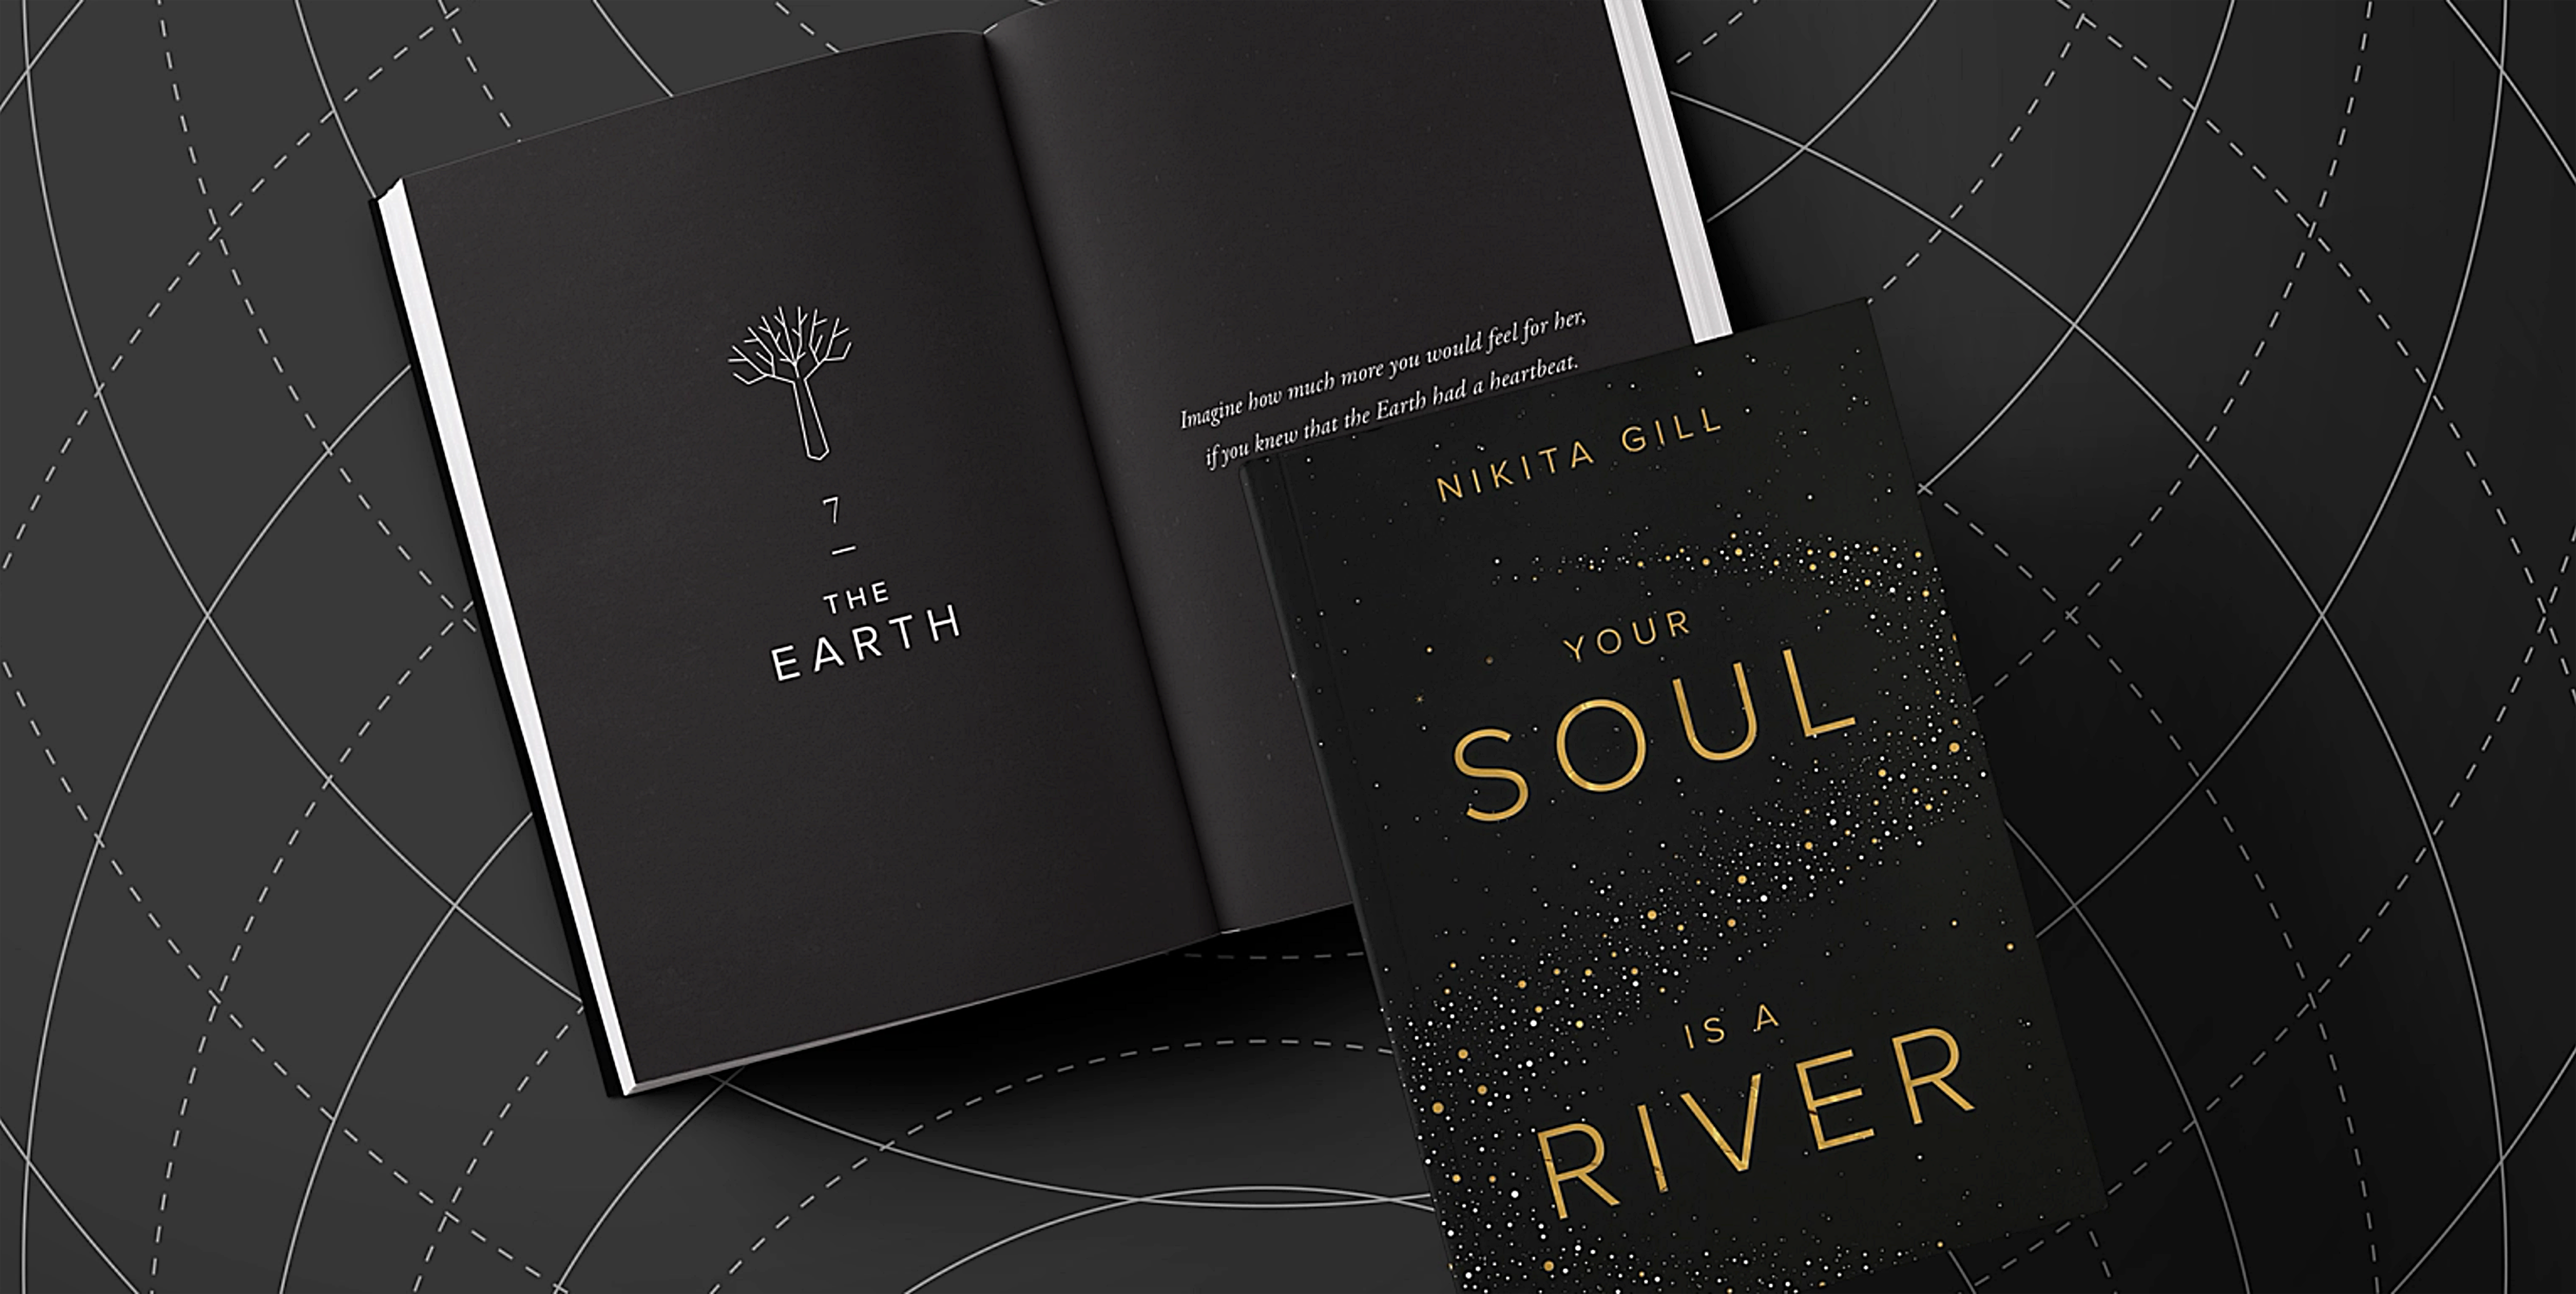 Your Soul is a River - Nikita Gill - Book